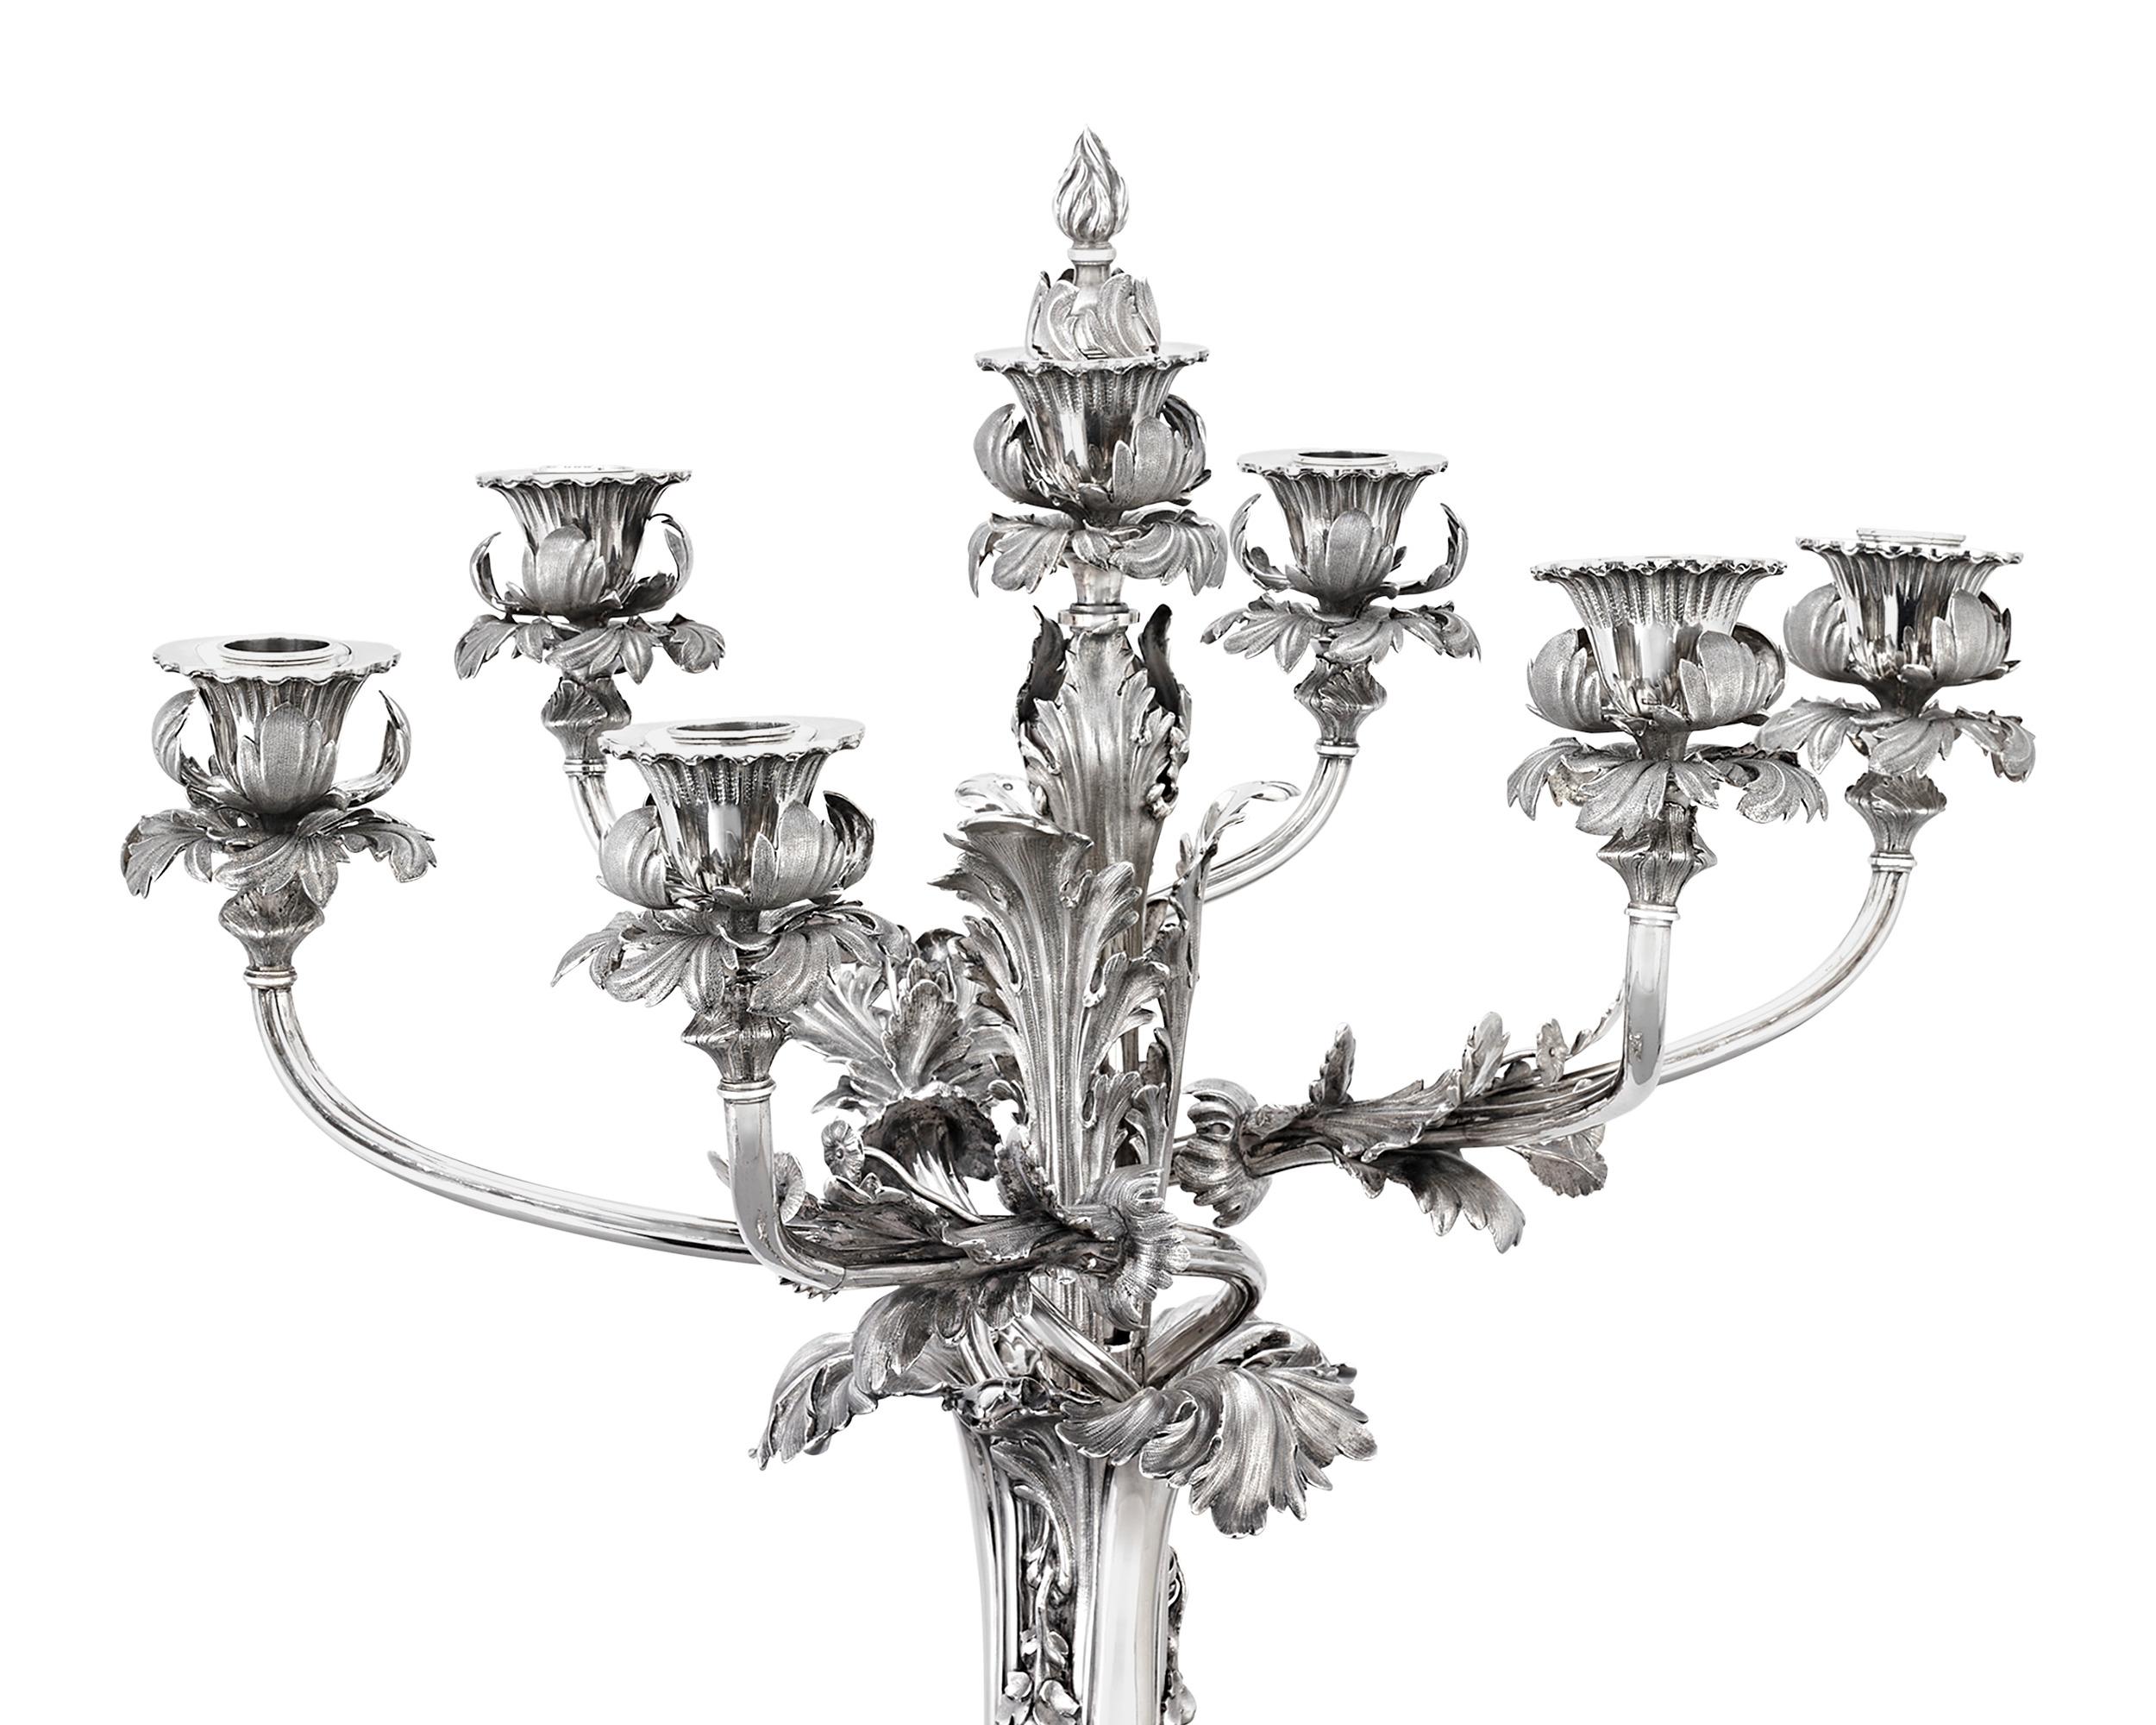 English Pair of Silver Neoclassical Candelabra by Robinson, Edkins & Aston